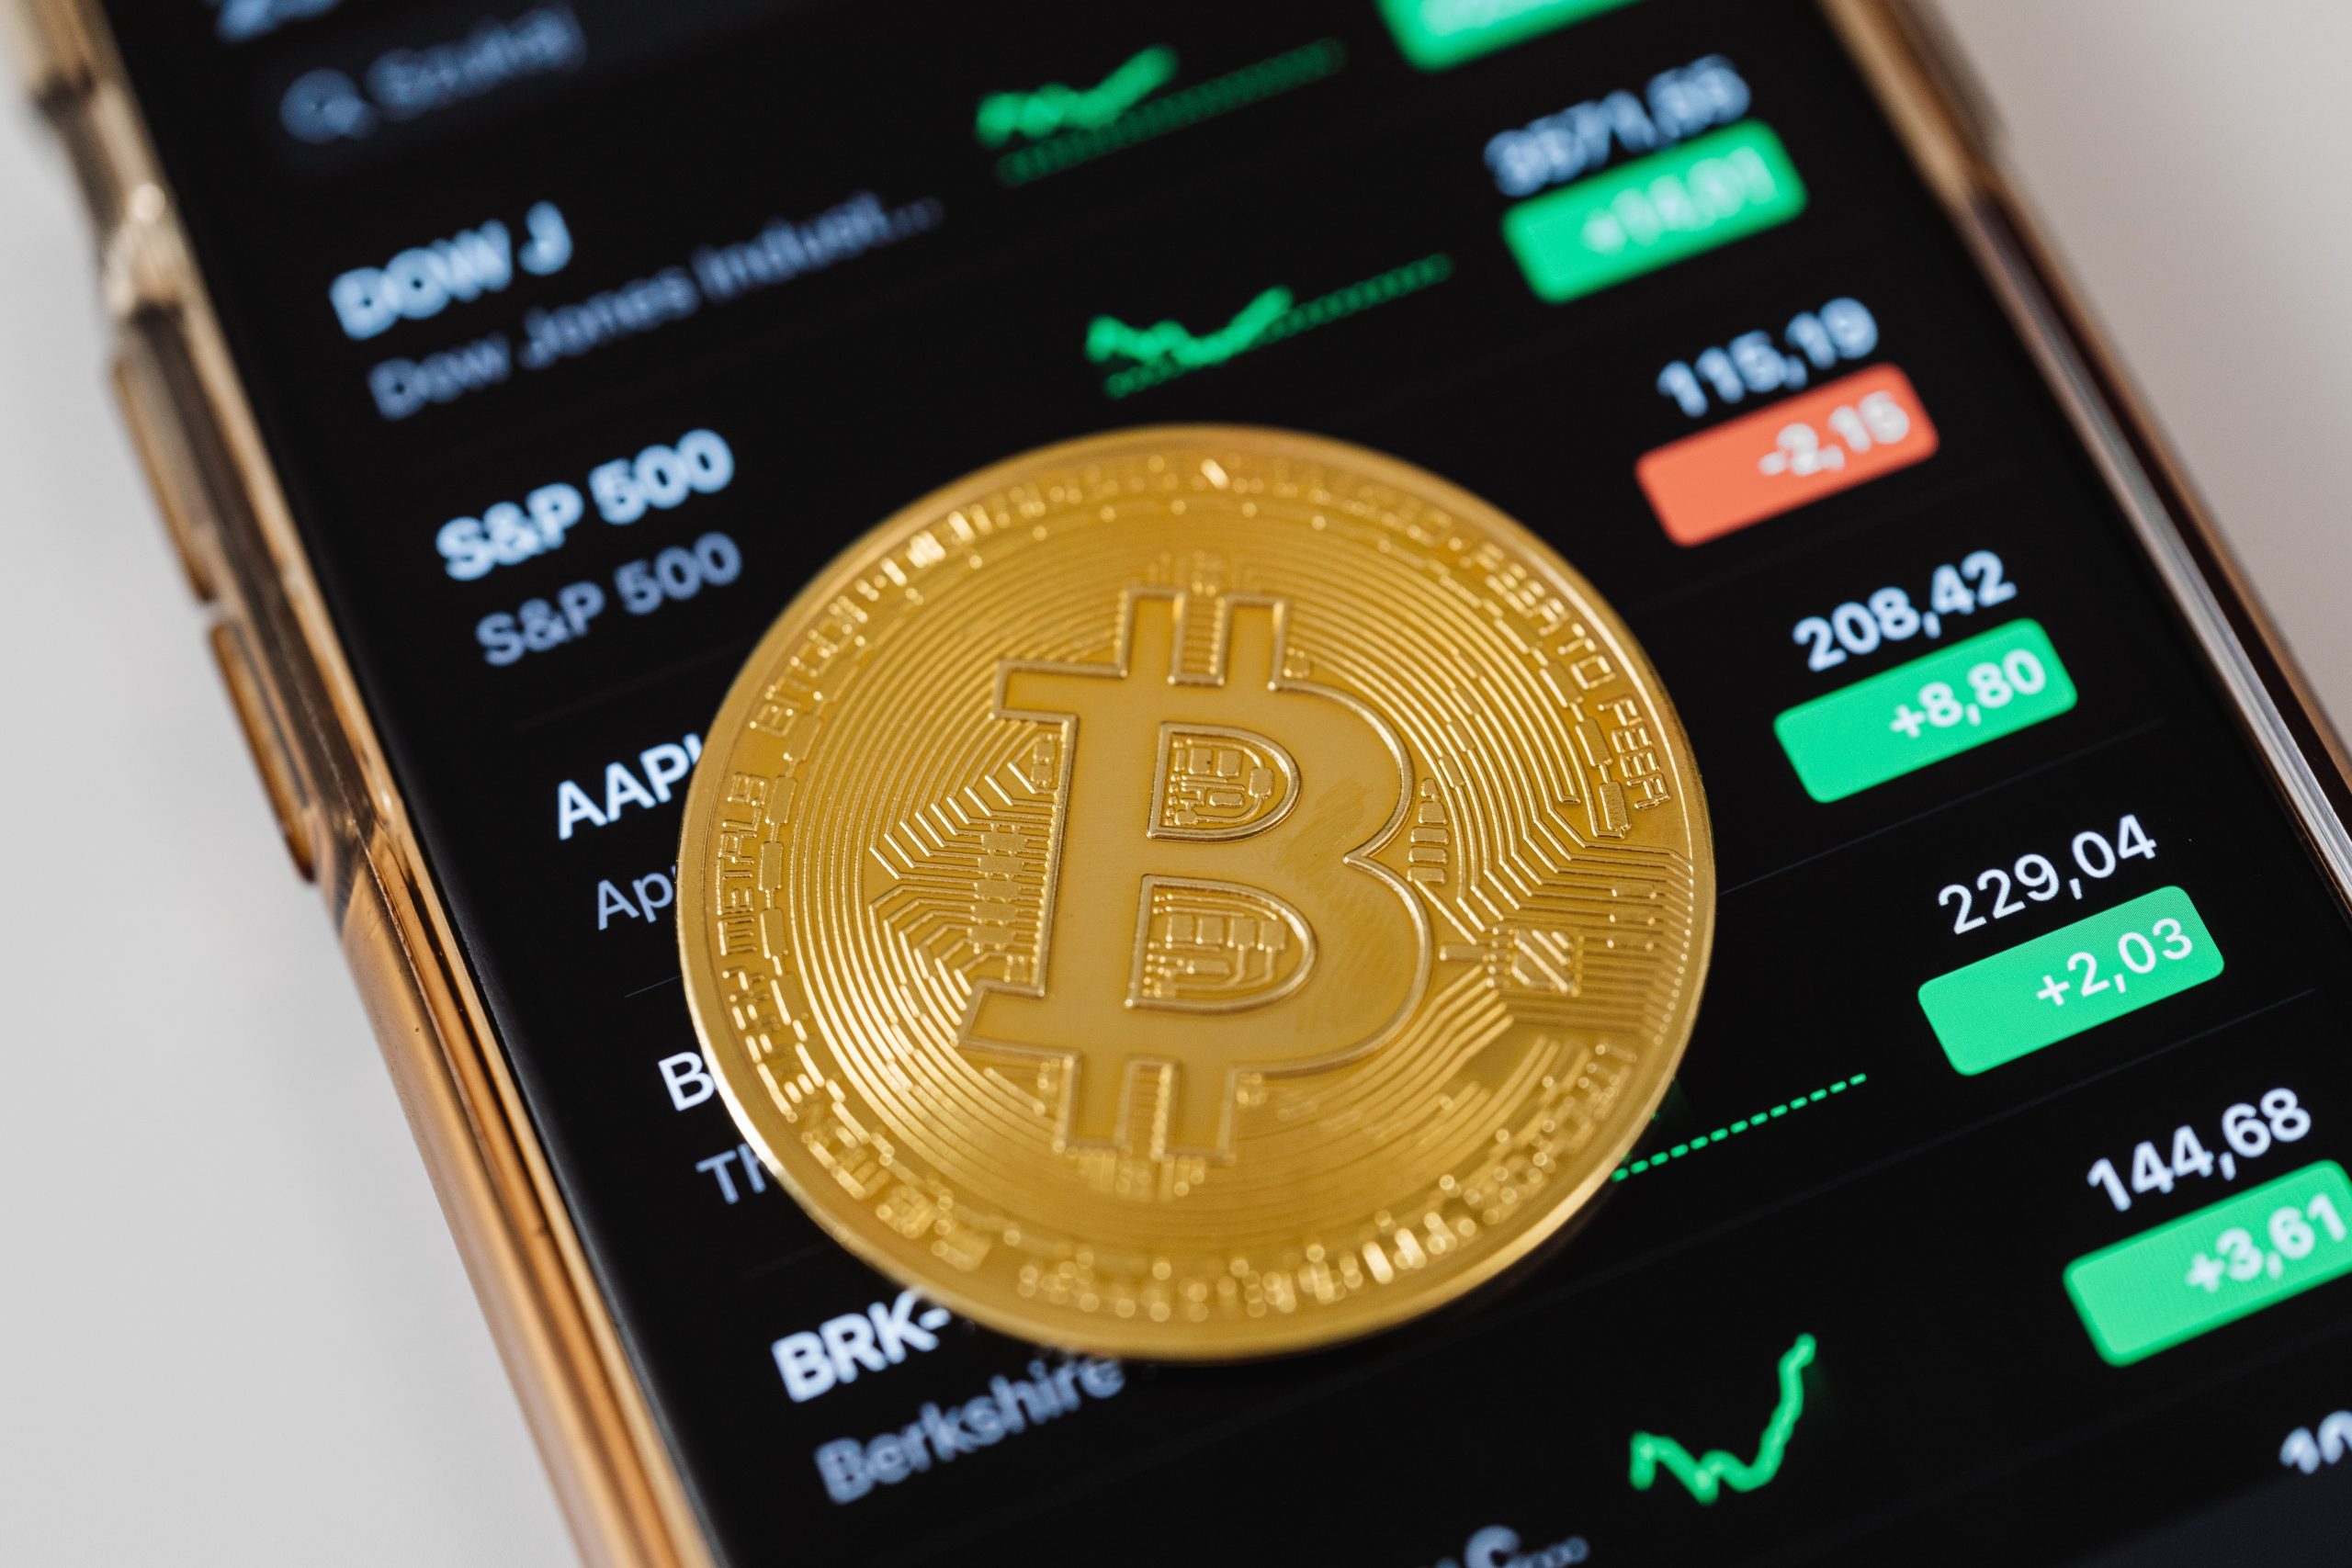 Cryptocurrency Prices Today on July 17: Bitcoin Down, Polkadot Sees Biggest -9.21% Slump